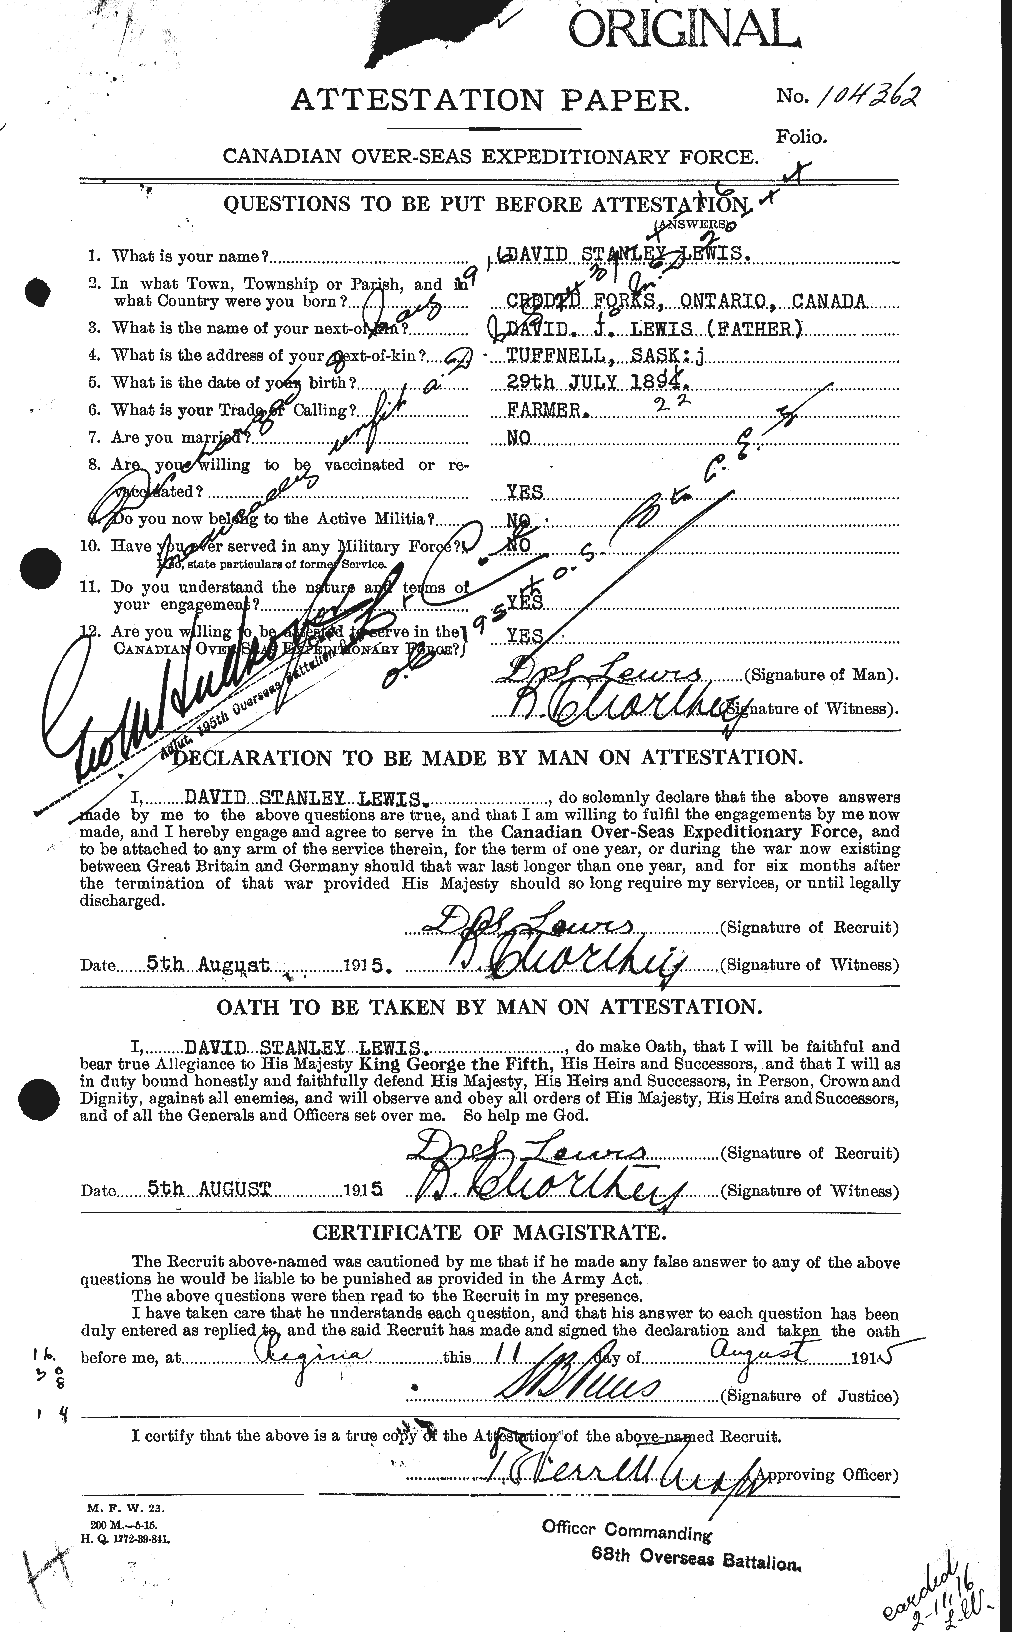 Personnel Records of the First World War - CEF 464984a